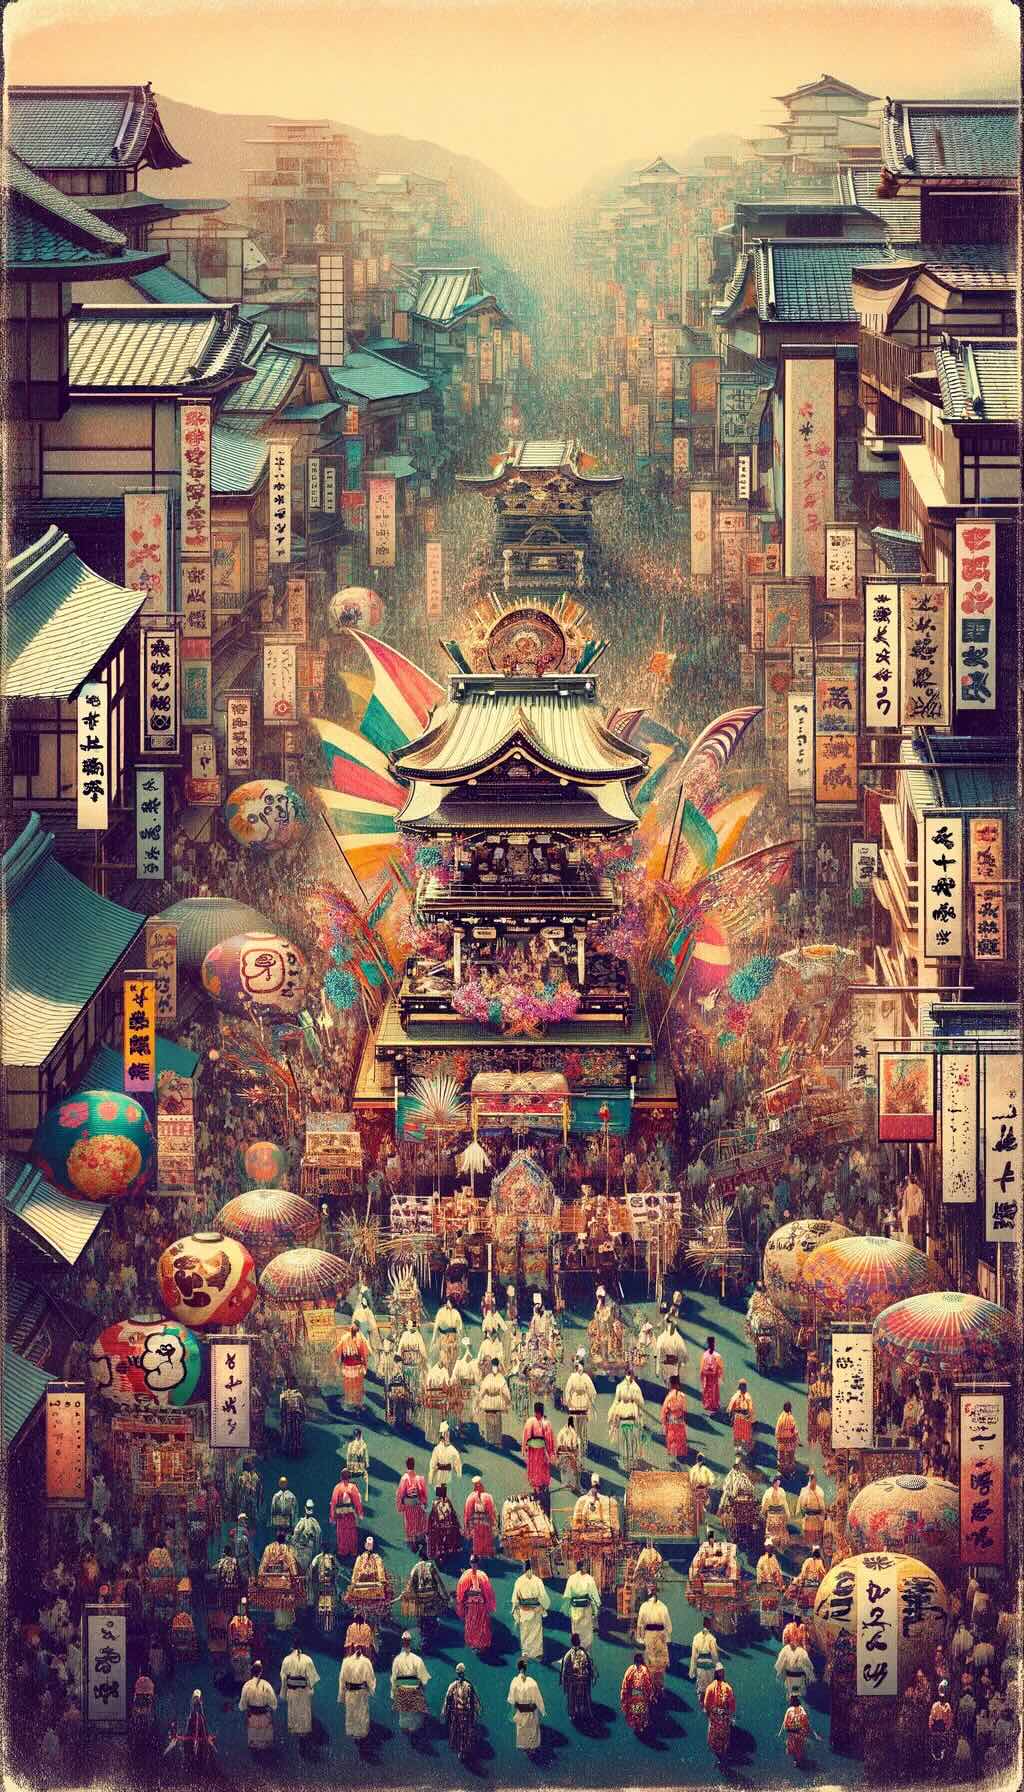 Essence of Matsuri, the vibrant and colorful festivals of Japan, in a retro fade style. It features elements like traditional costumes, street parades, and ceremonial activities, showcasing the diversity from urban celebrations to traditional rituals. The use of rich, vibrant colors with a faded, nostalgic feel conveys the communal joy, reverence, and cultural pride that these festivals bring to Japanese communities.